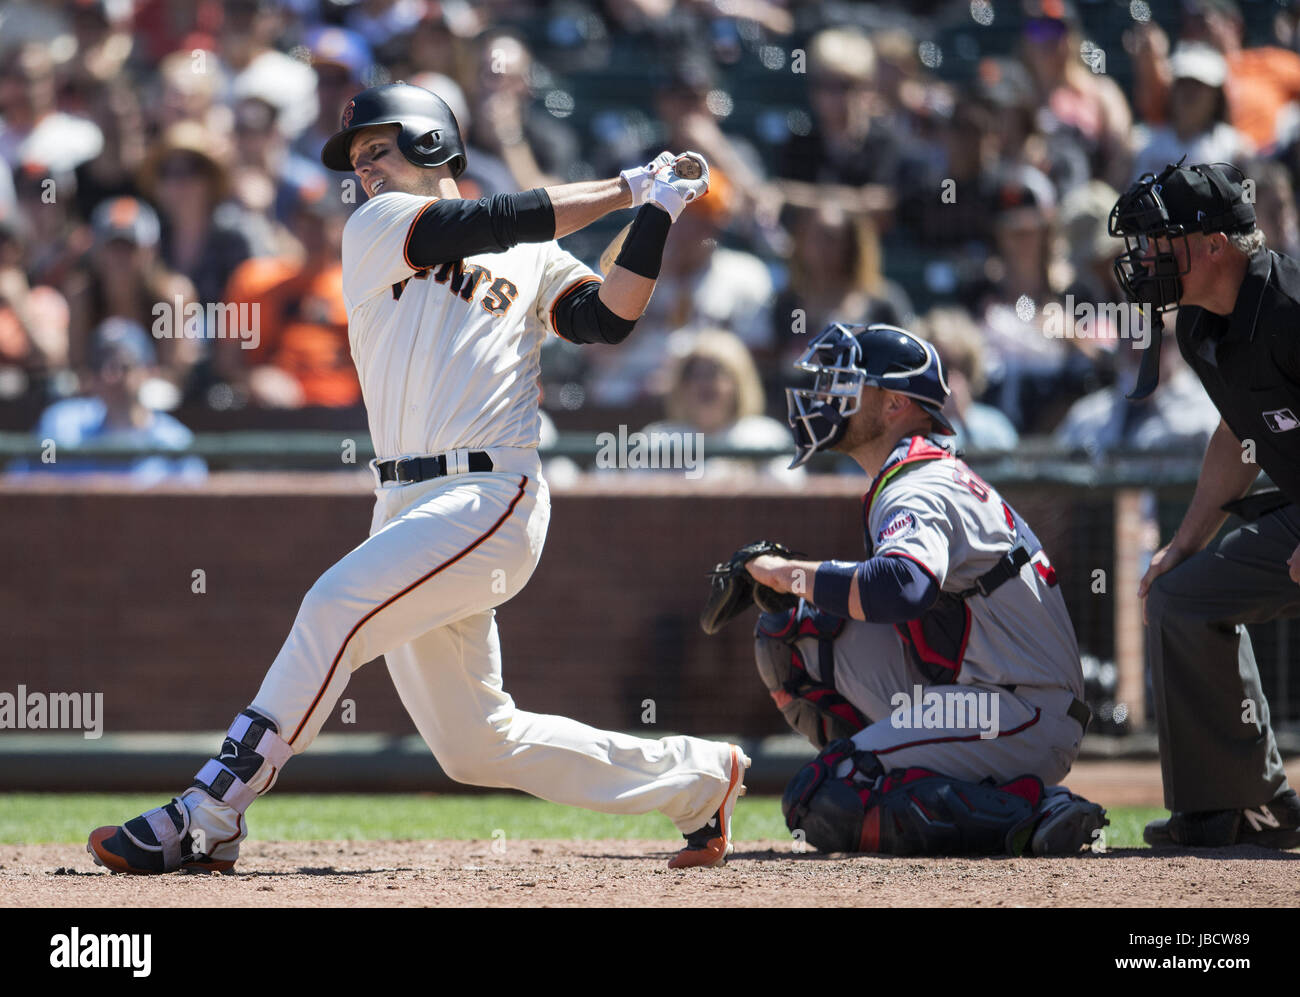 San Francisco, California, USA. 10th June, 2017. Lead off the eighth inning, San Francisco Giants catcher Buster Posey (28), hits a foul ball during a MLB baseball game between the Minnesota Twins and the San Francisco Giants on Autism Awareness Day at AT&T Park in San Francisco, California. Valerie Shoaps/CSM/Alamy Live News Stock Photo